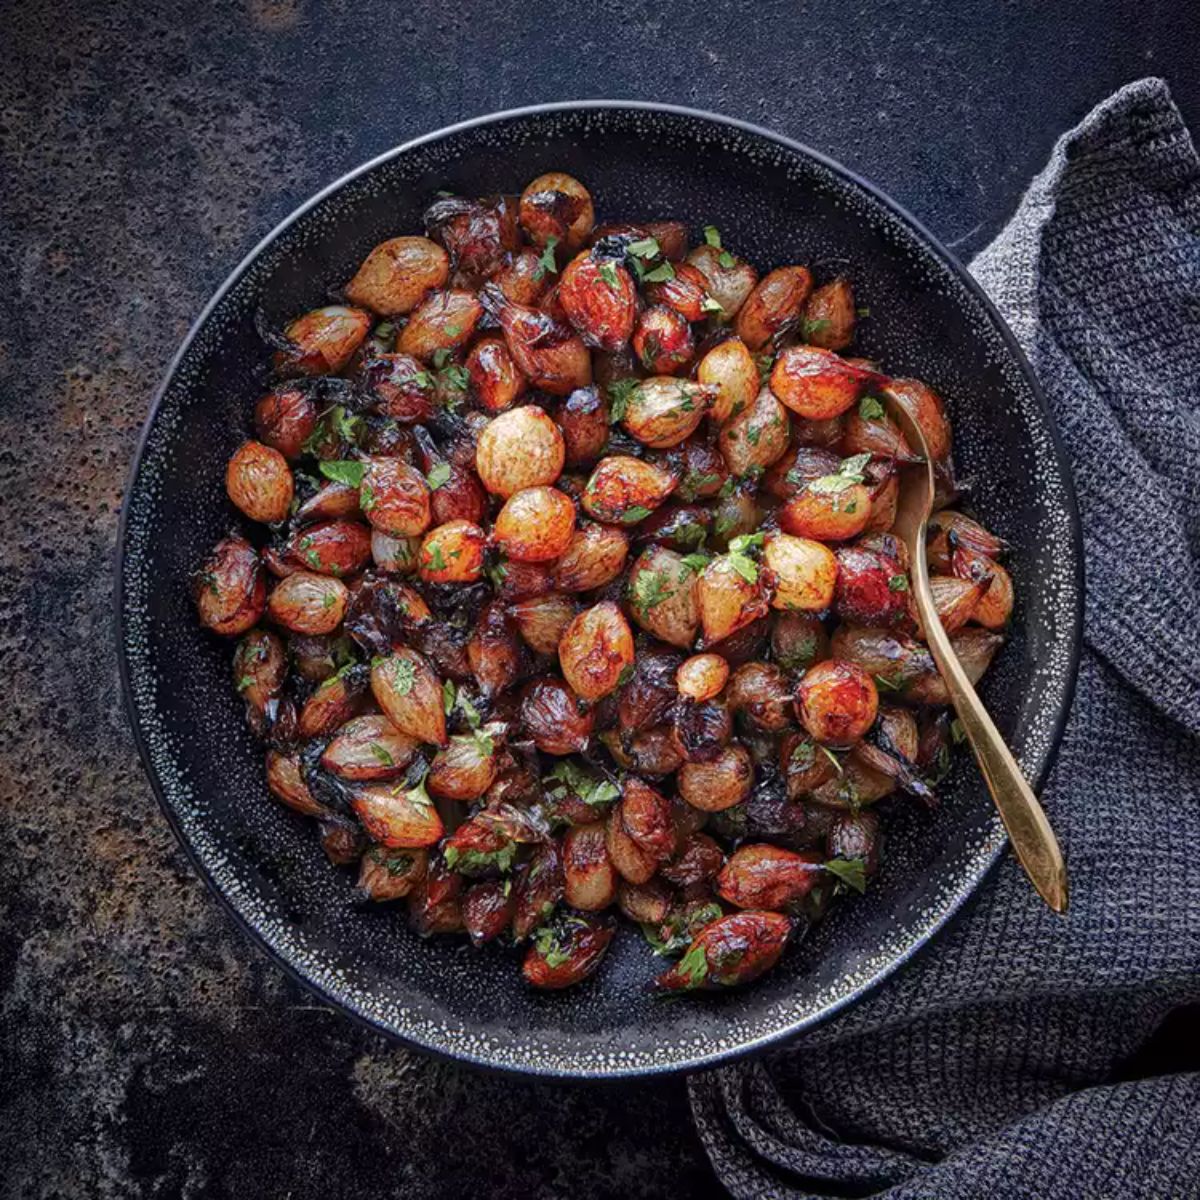 Balsamic-glazed pearl onions in a black skillet with a spoon.